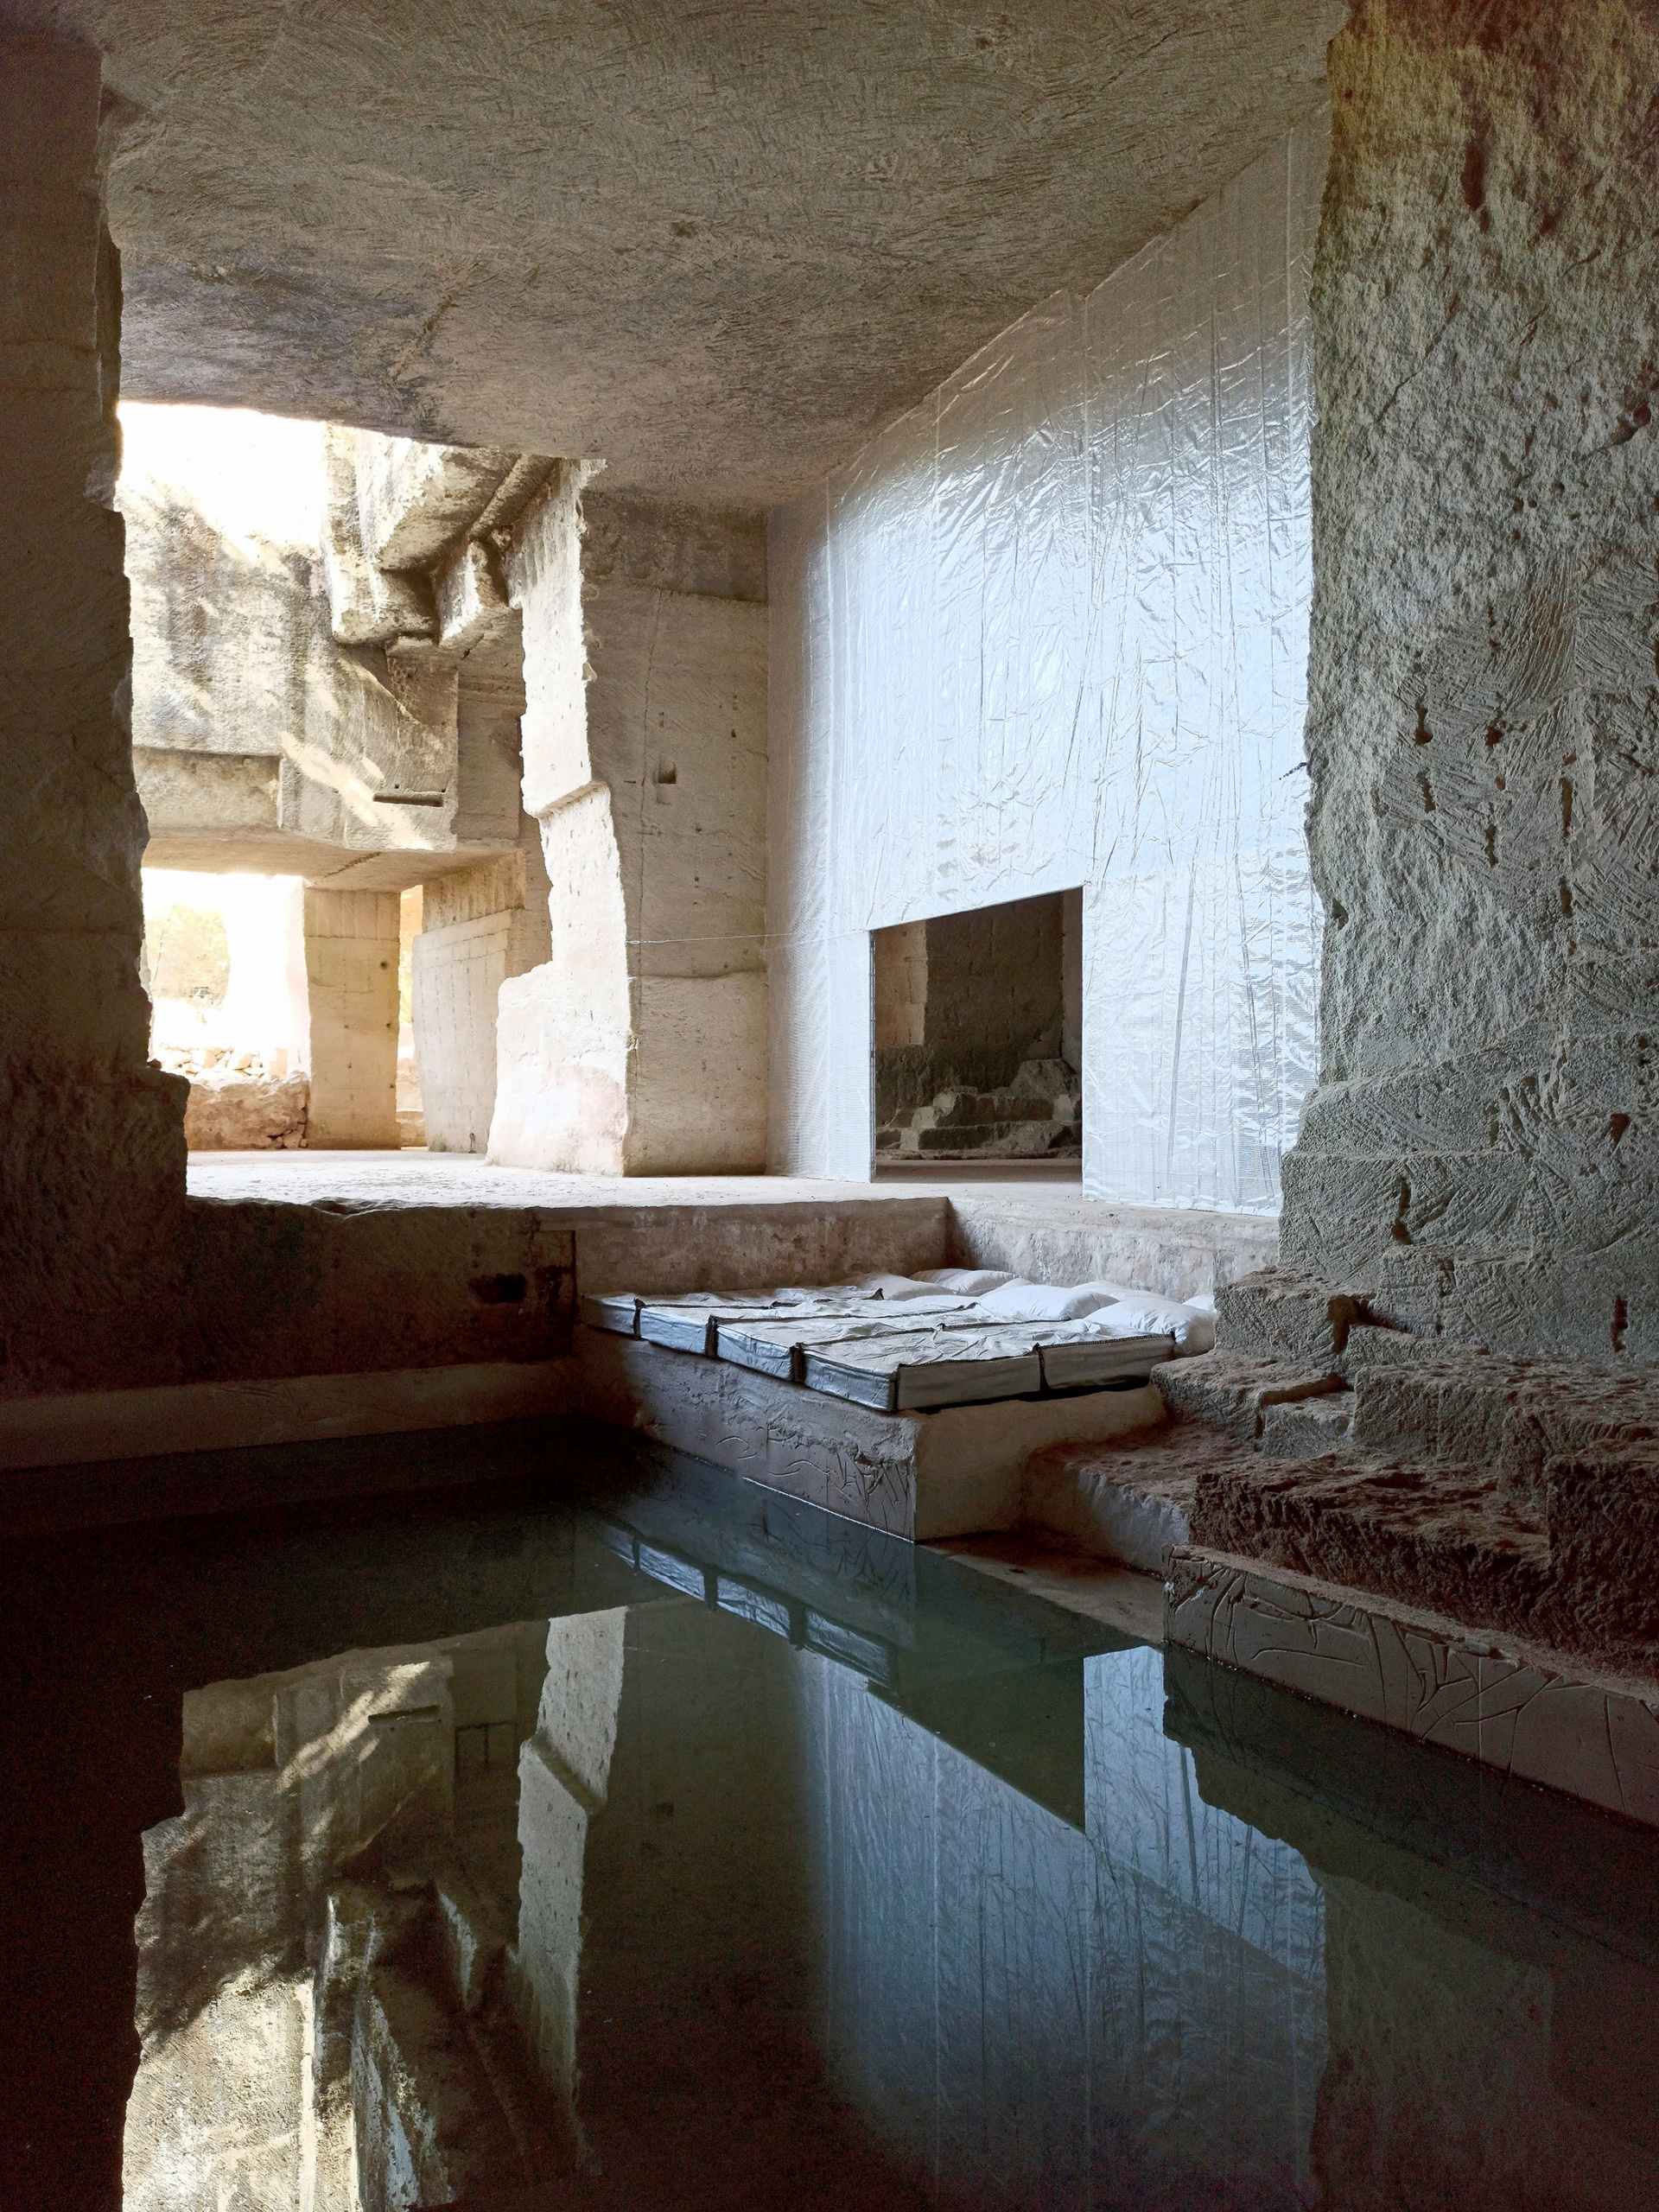 pool inside home in quarry